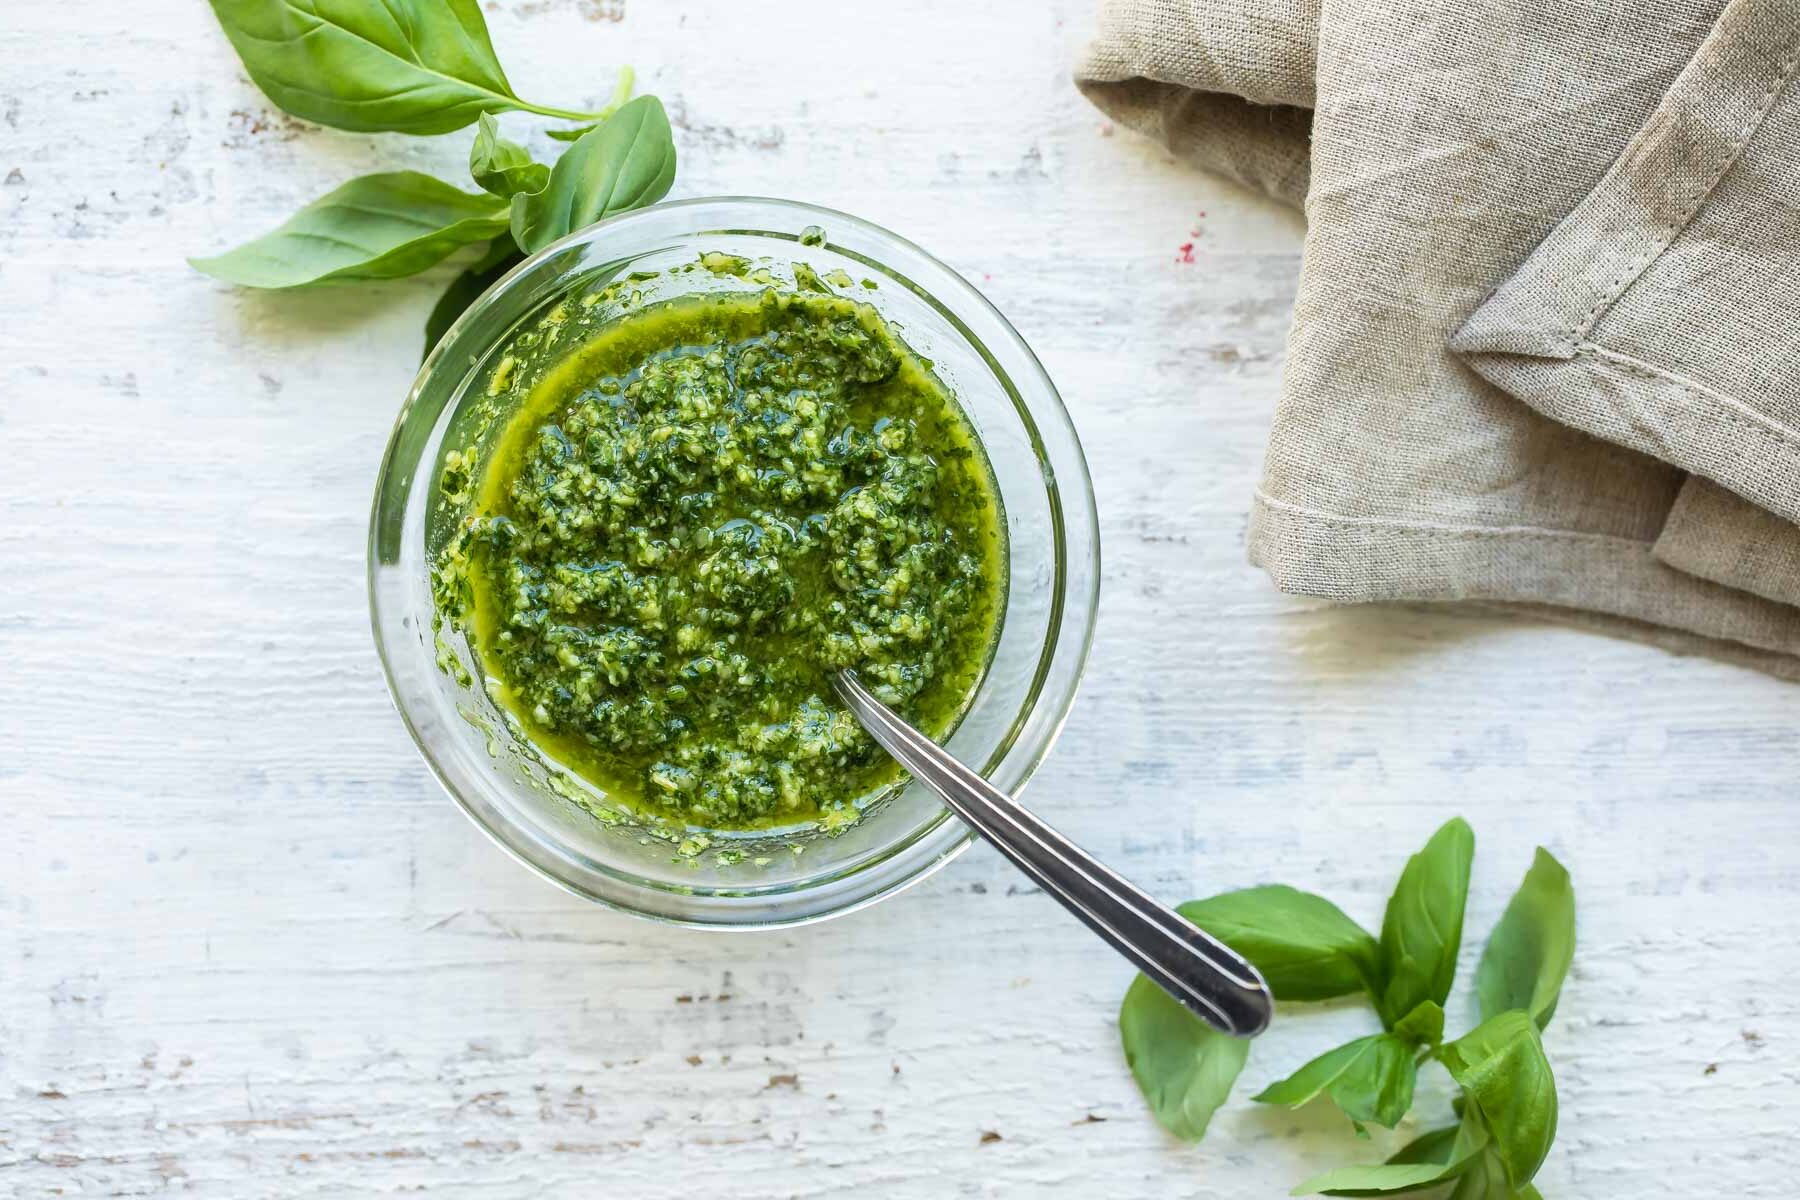 Basil pesto in a silver bowl with a spoon resting in it.